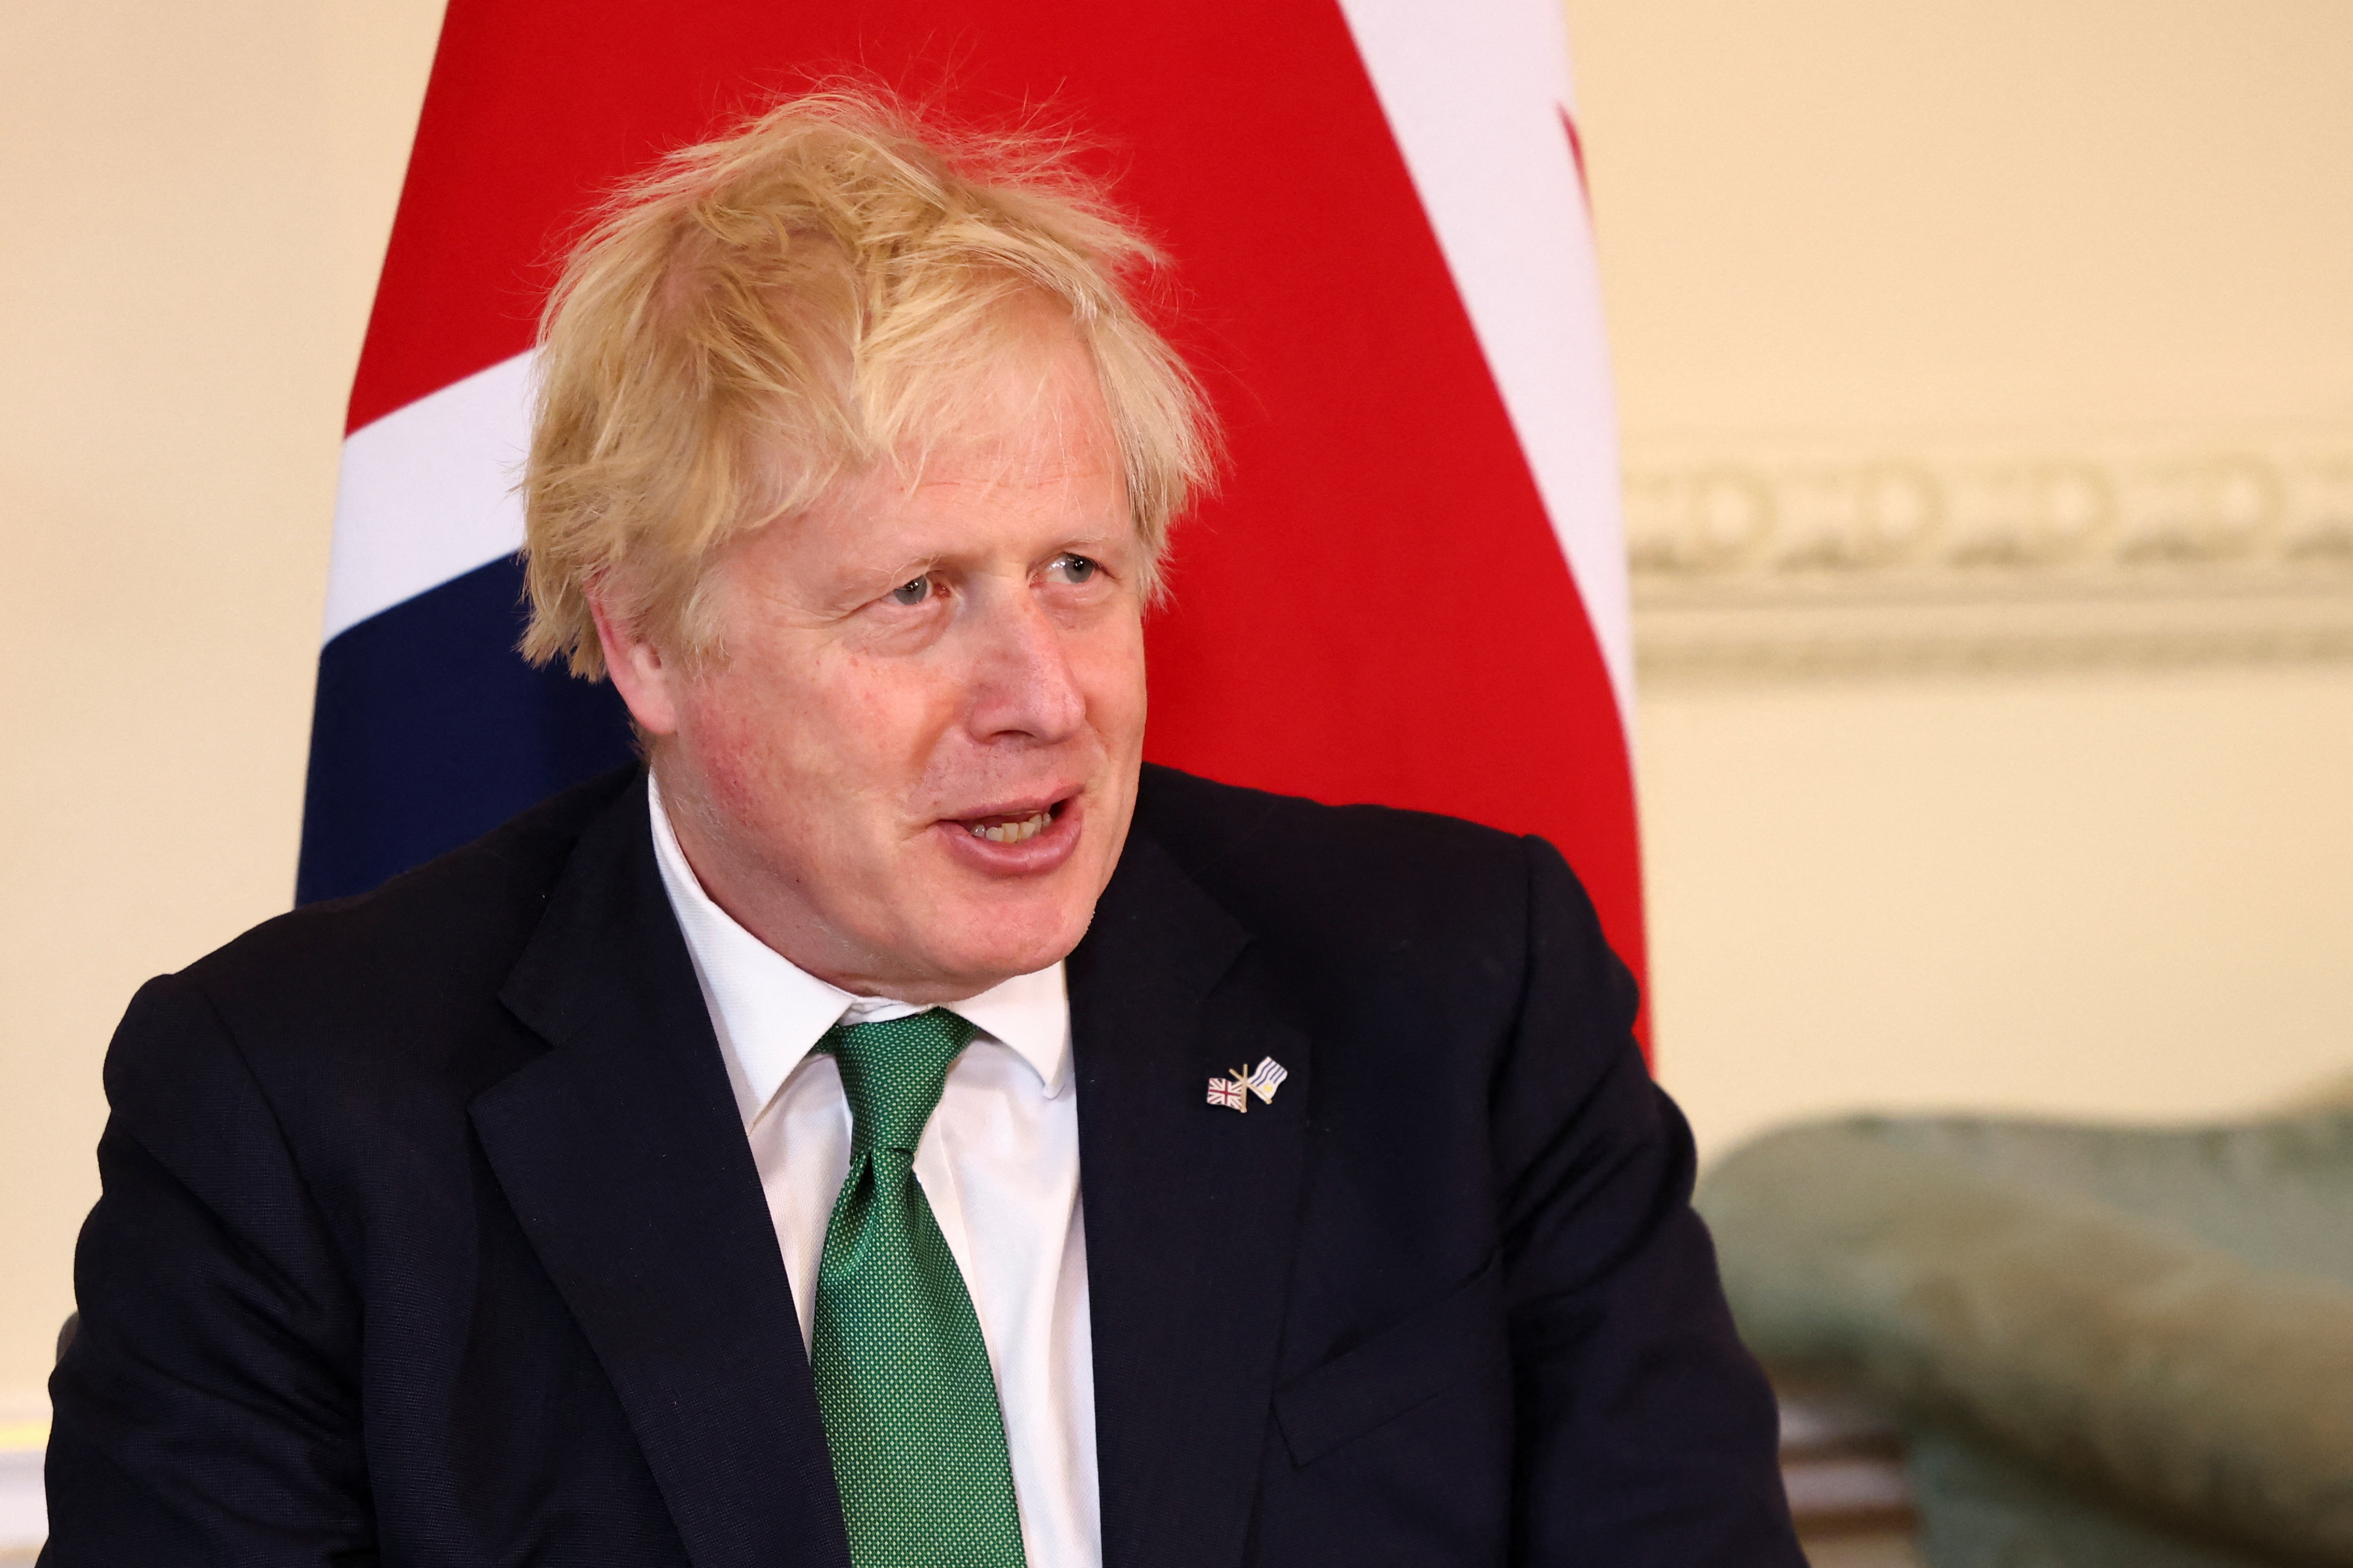 British PM Johnson meets with Uruguay's President Lacalle Pou in London